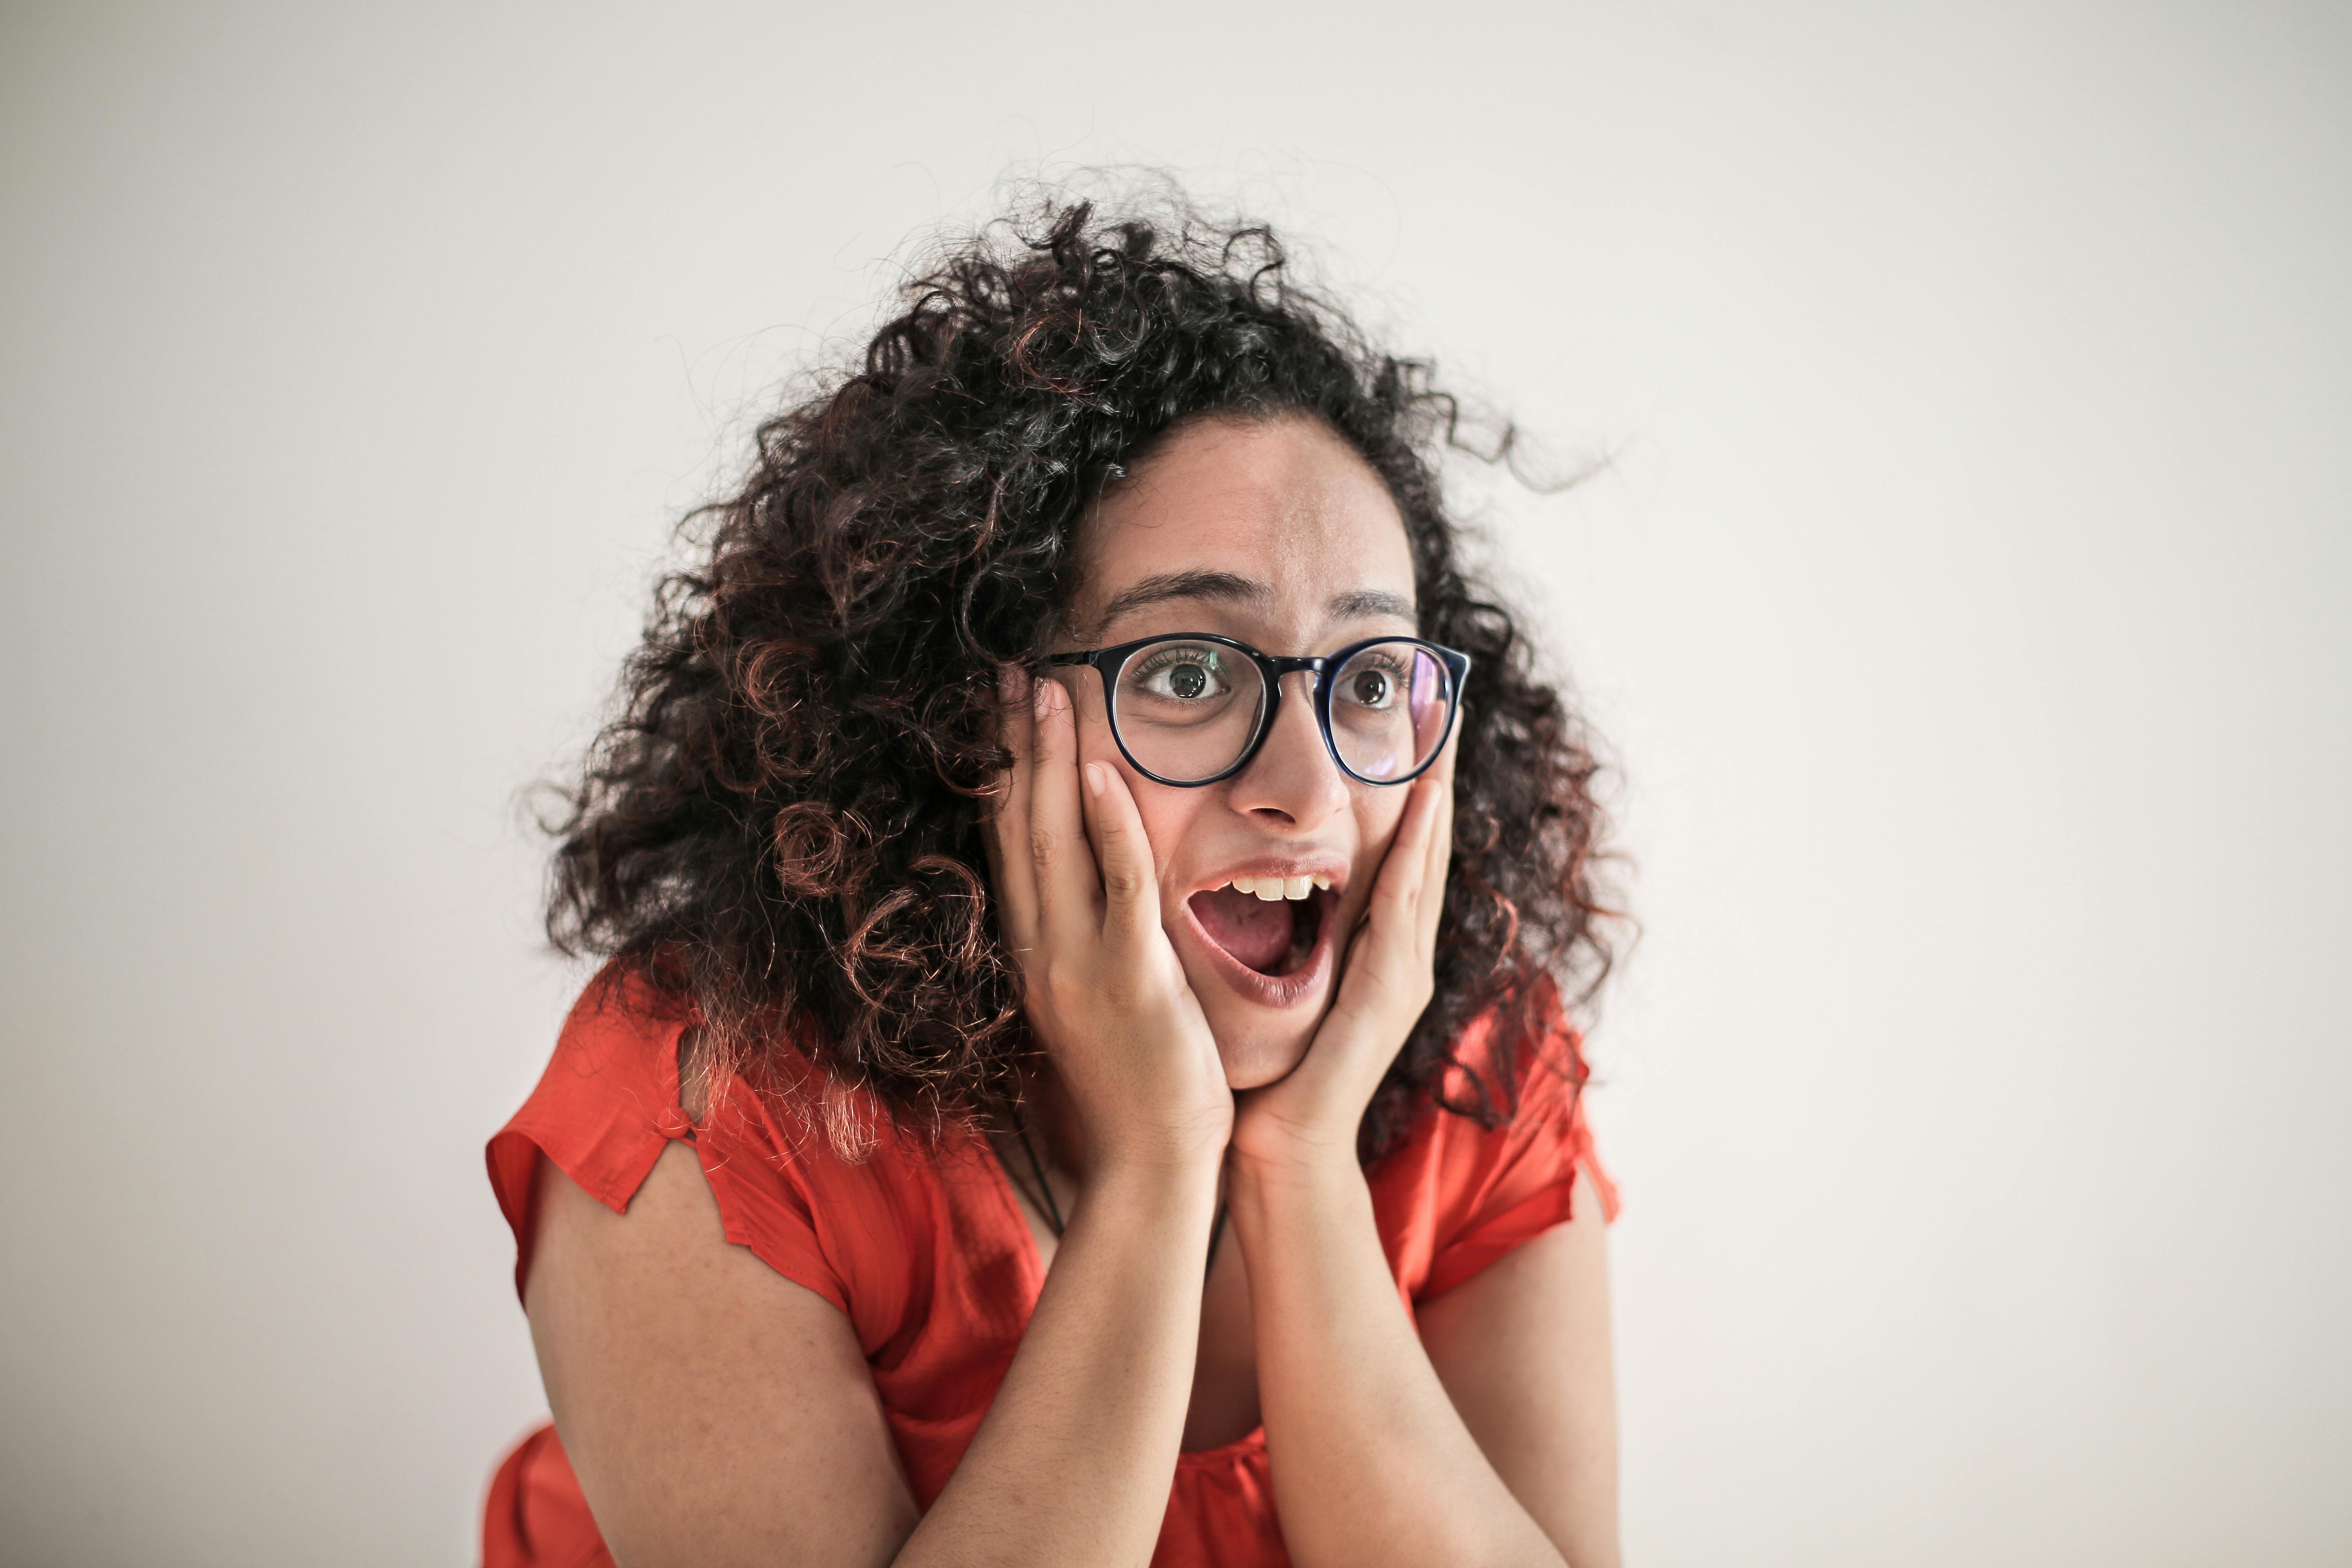 A shocked woman with her hands on her face | Source: Pexels